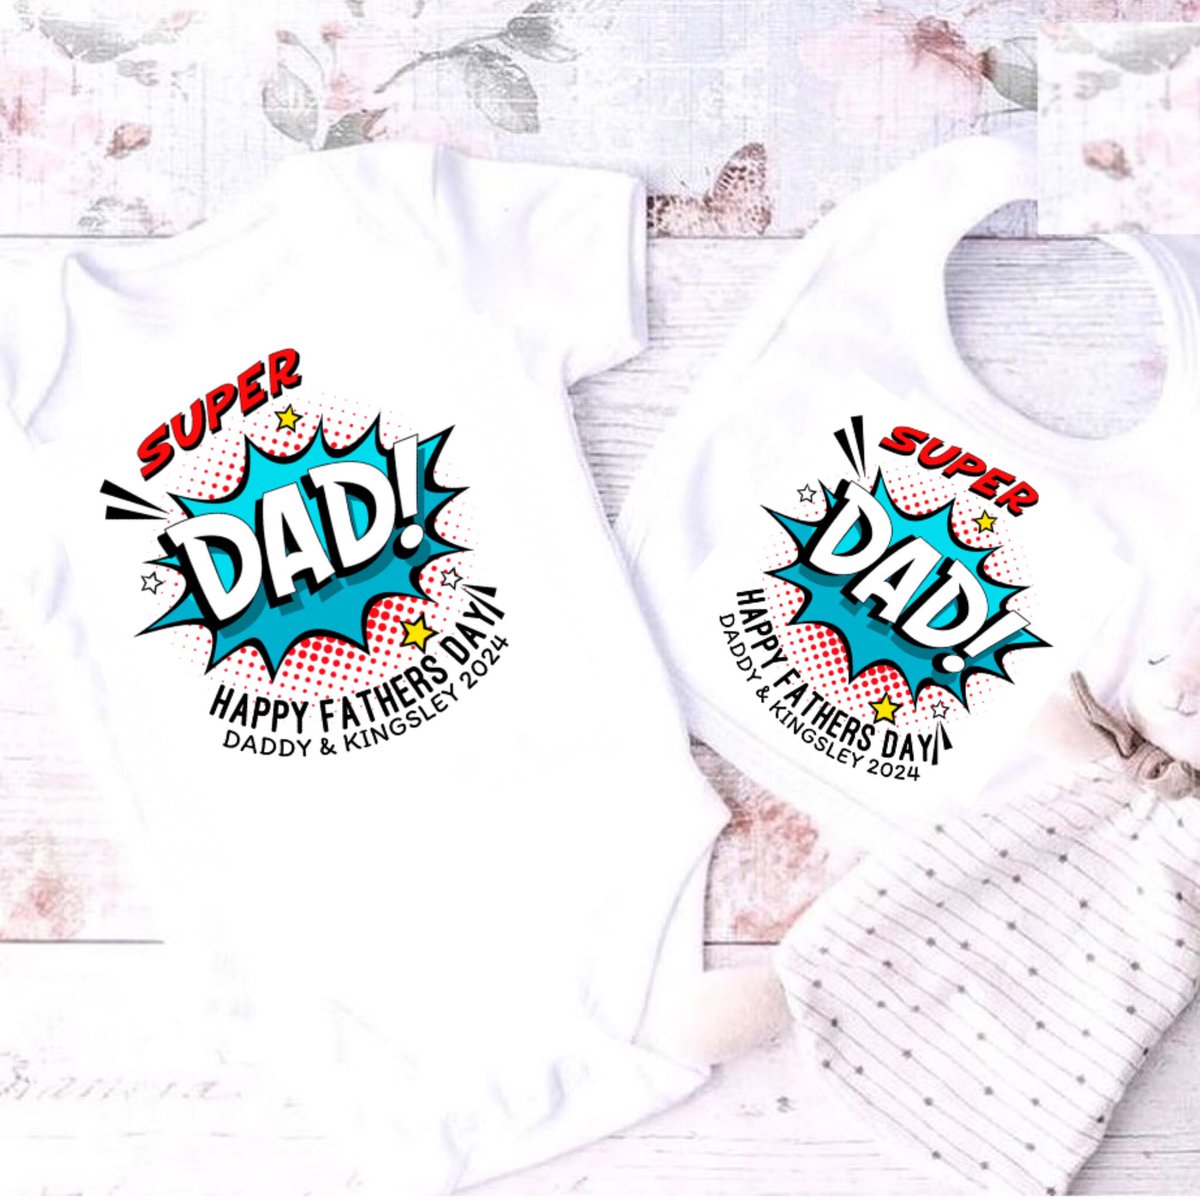 coseycollections.etsy.com/?section_id=47… #FathersDay #fathersdaygift #DADDY #daddygifts #PersonalizedGifts #personalisedgifts #dadgift #firstfathersday #1stfathersday #babyclothes #newbornoutfit 💙